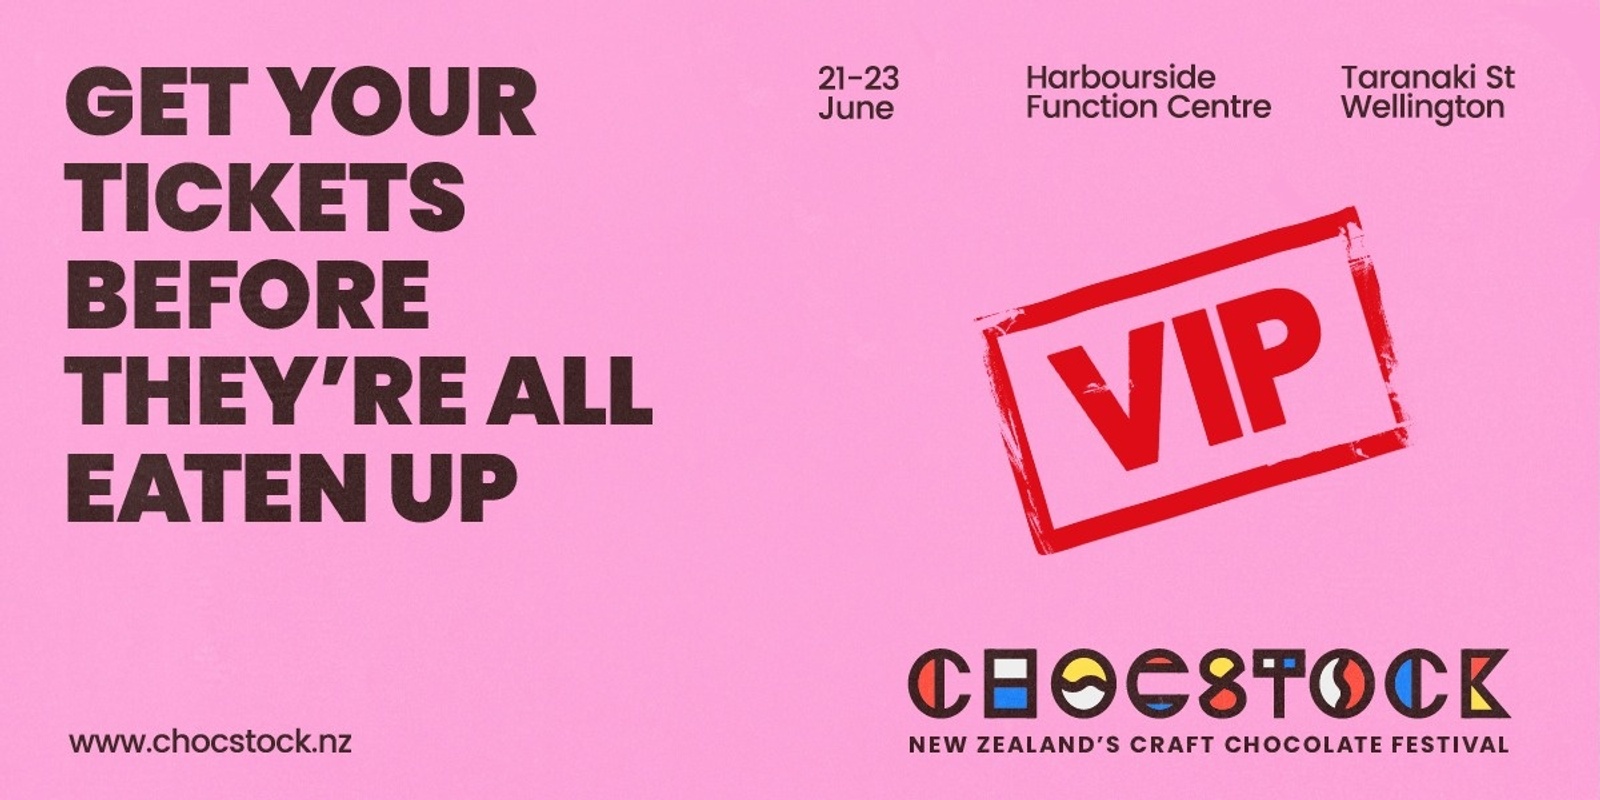 Banner image for VIP Session Friday 5-8pm - Chocstock – New Zealand's Craft Chocolate Festival